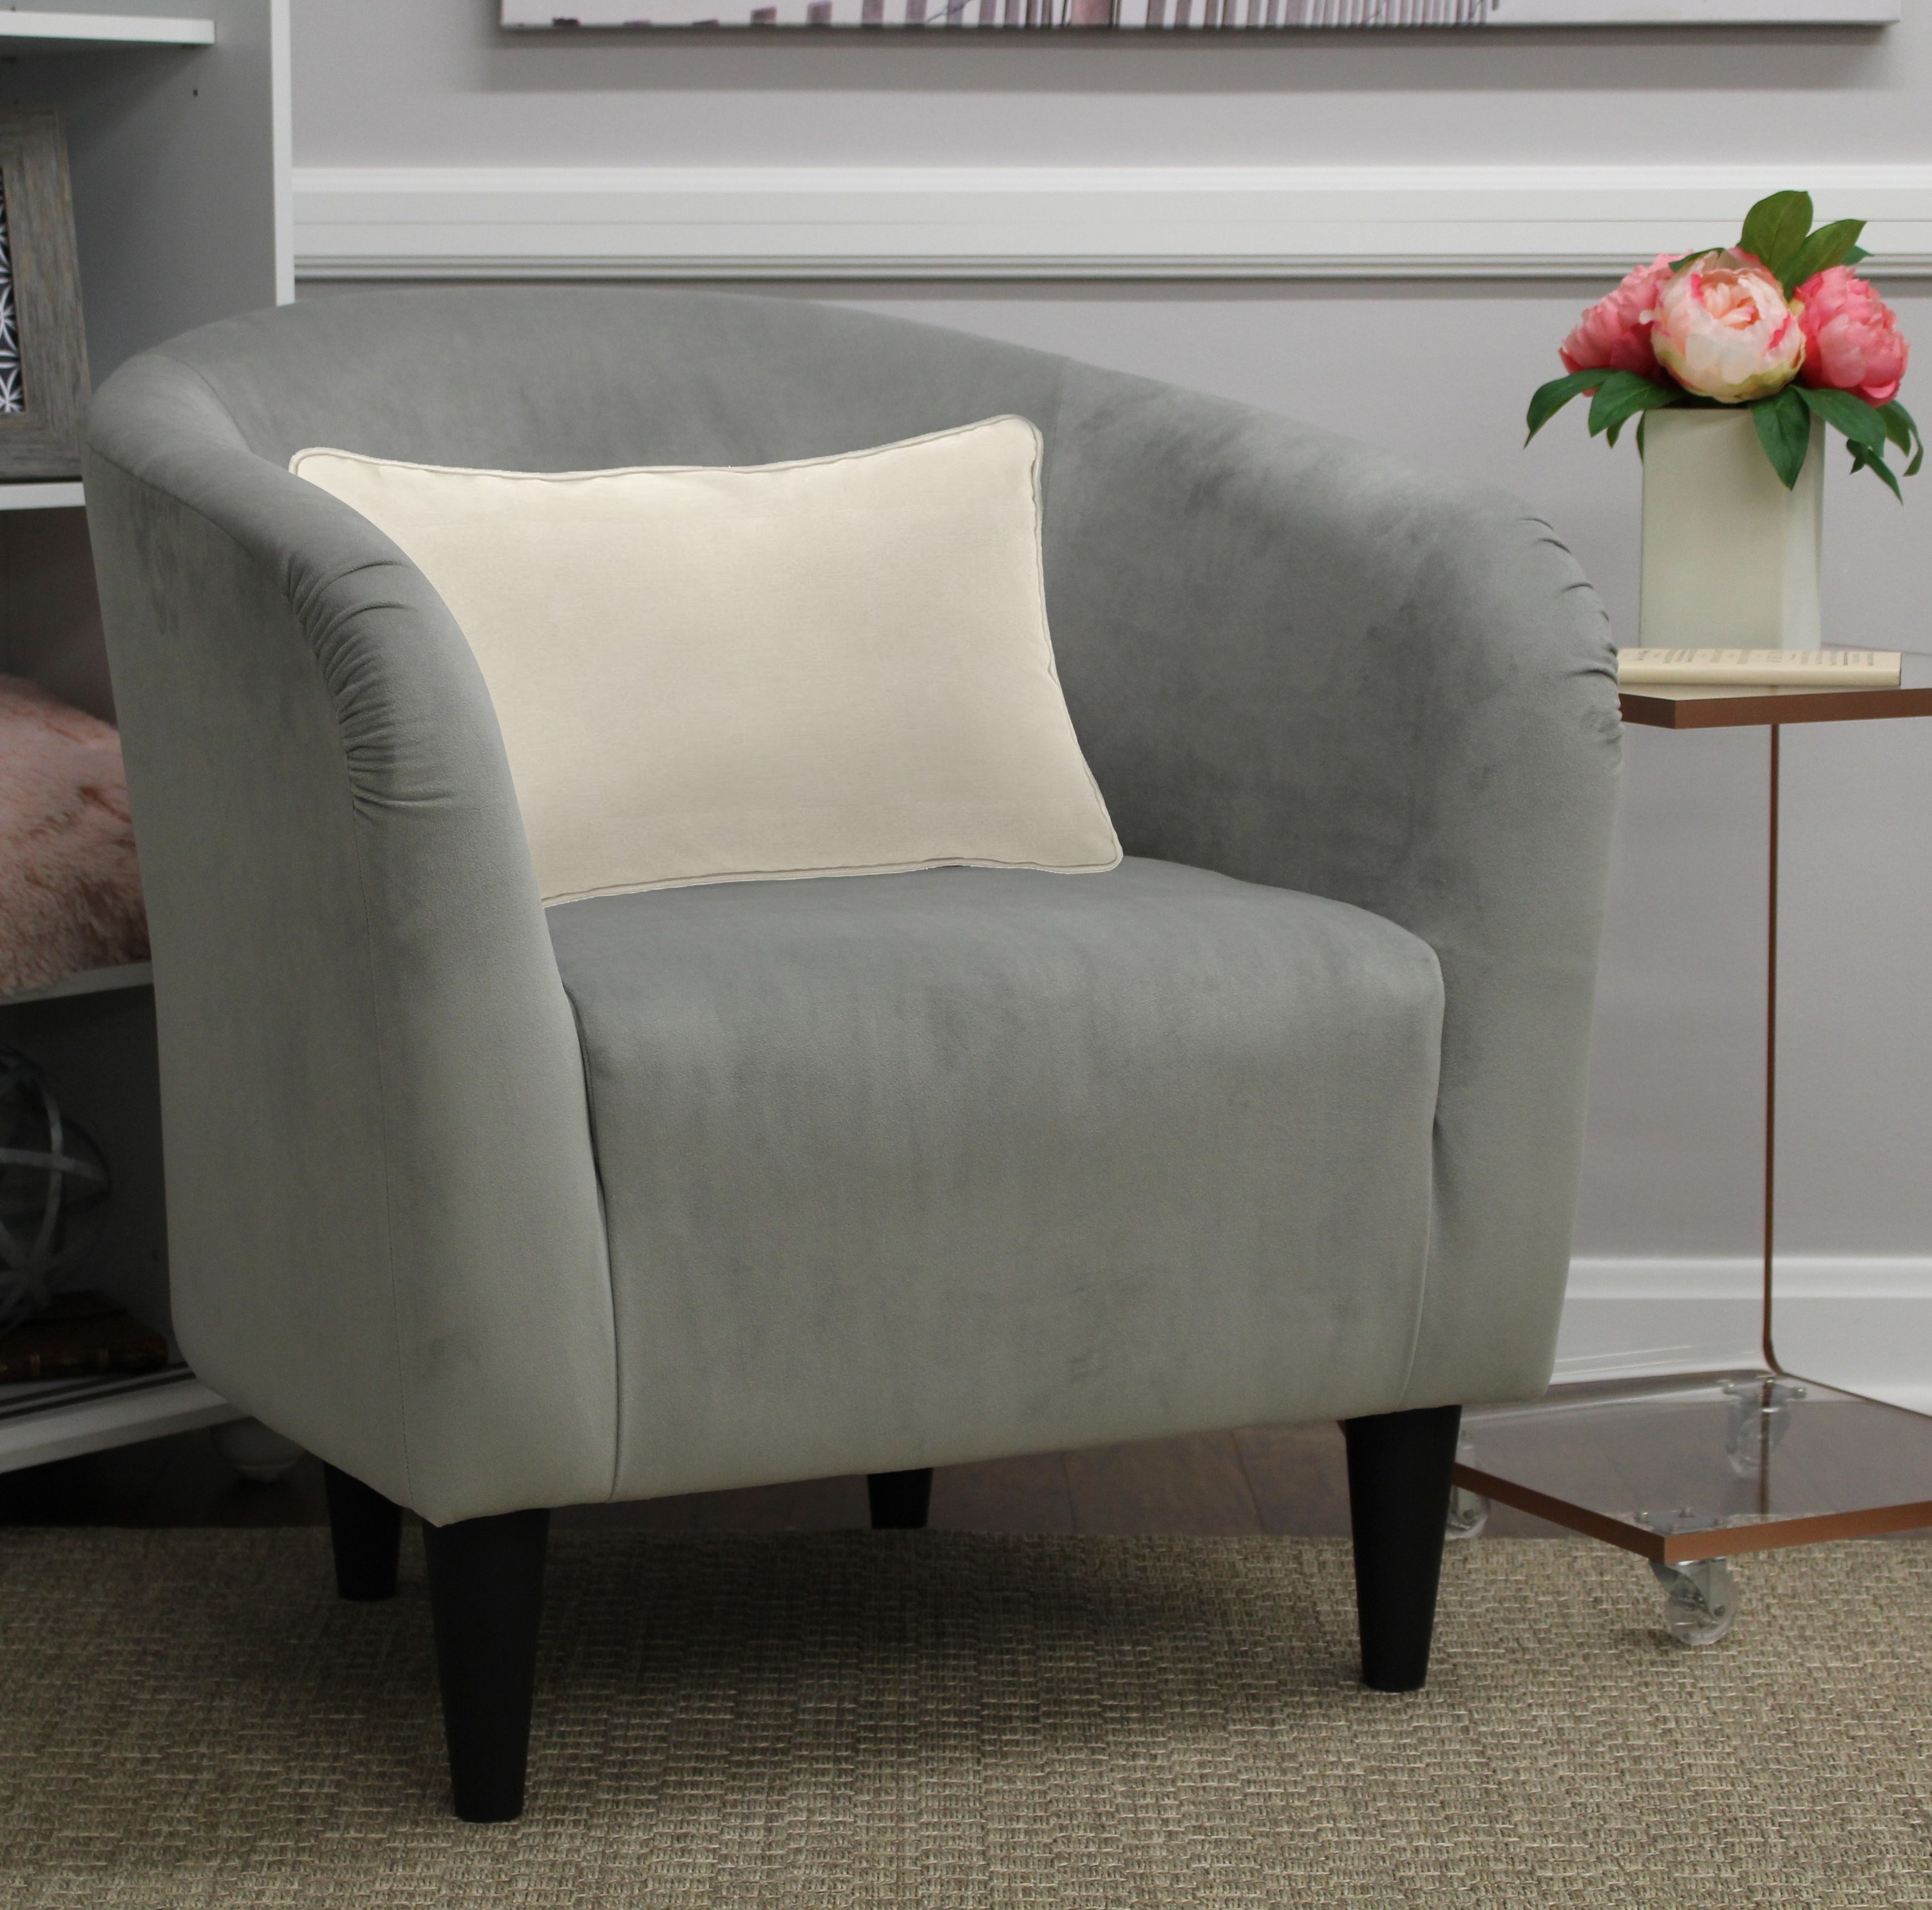 Dove grey accent chair